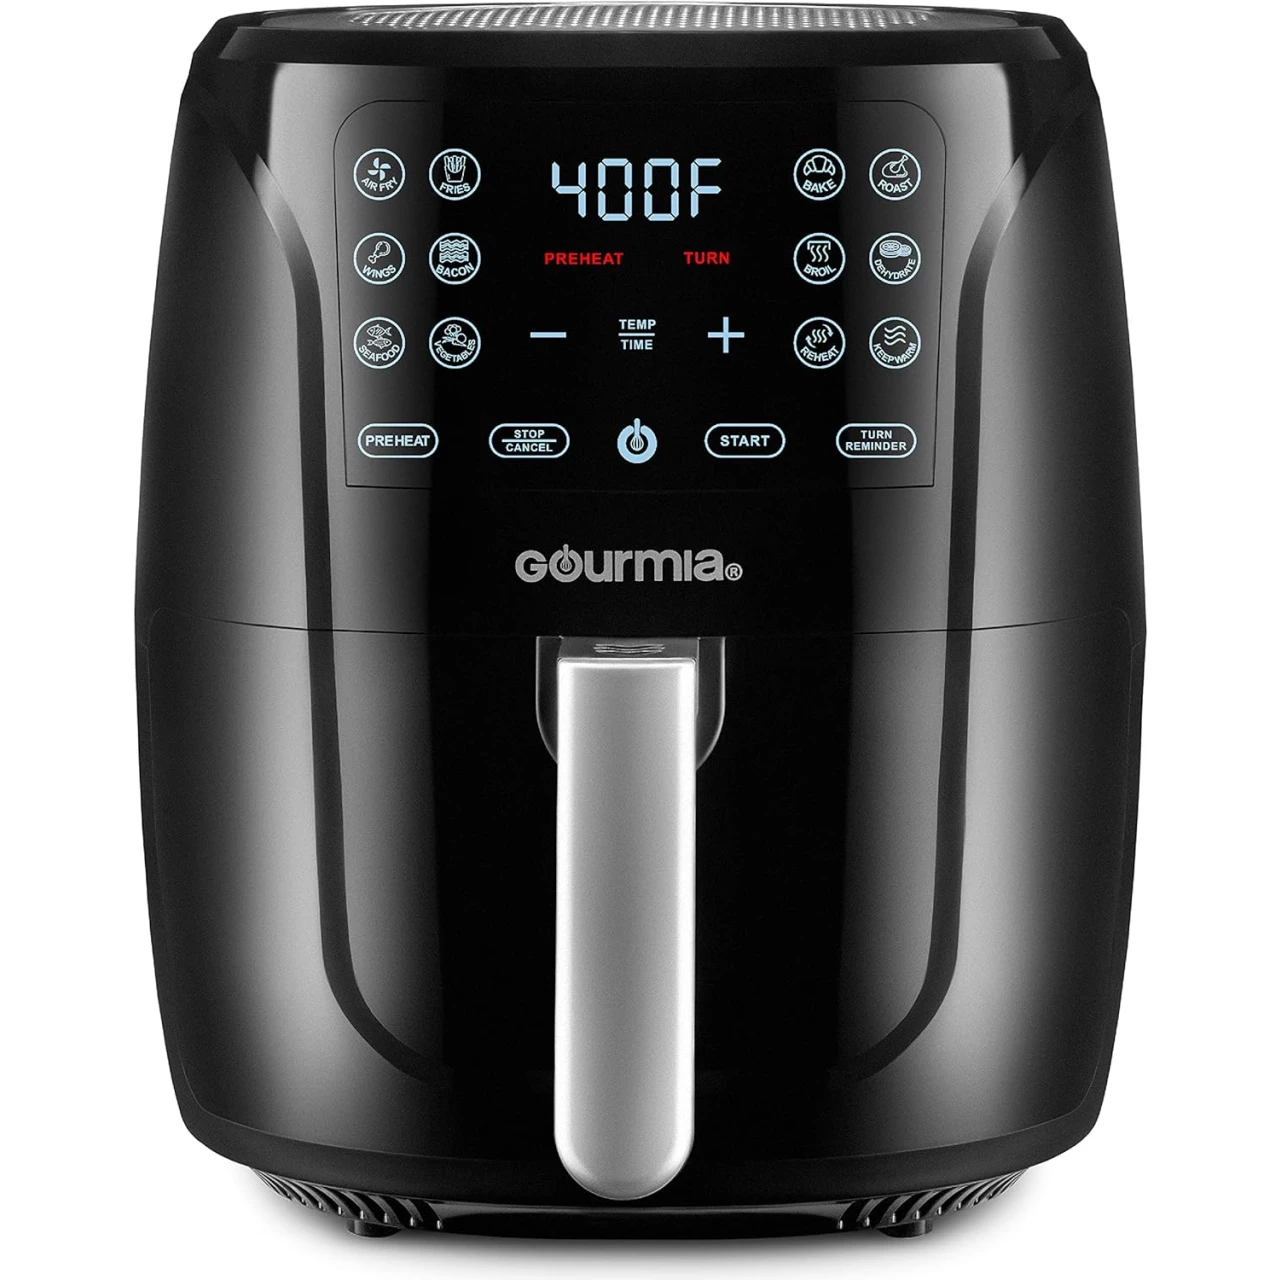 Gourmia Air Fryer Oven Digital Display 6 Quart Large AirFryer Cooker 12 1-Touch Cooking Presets